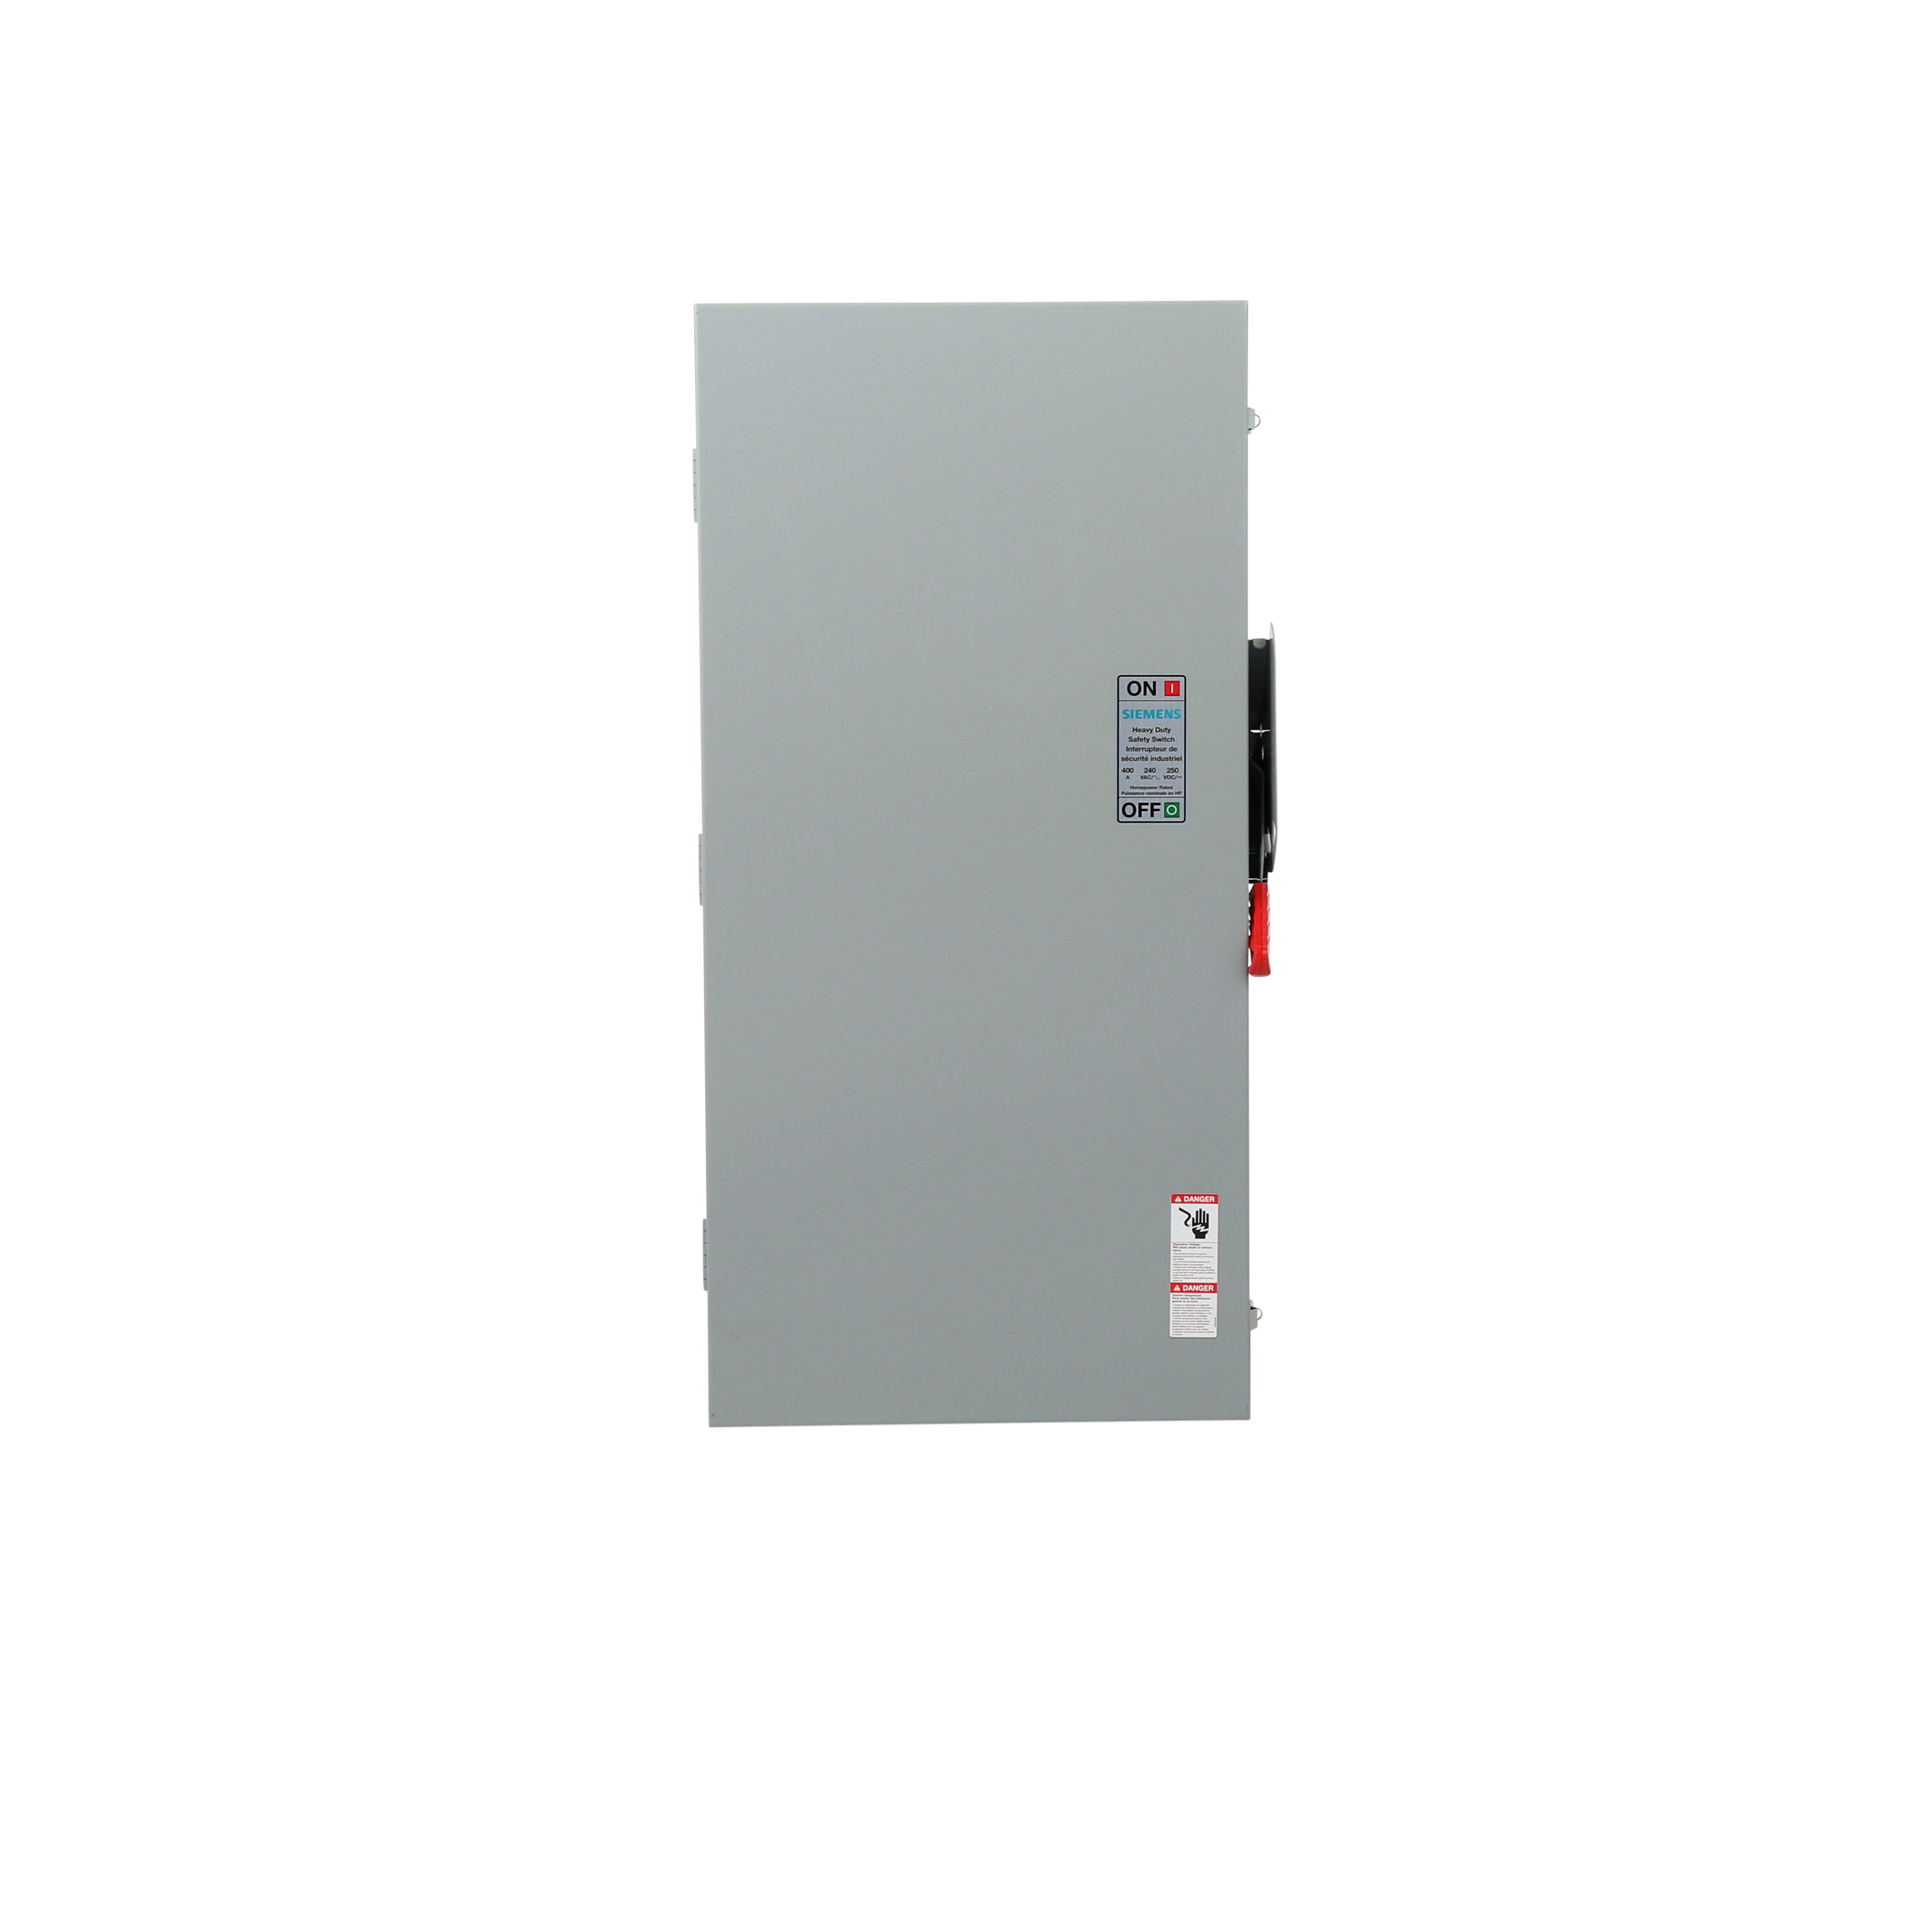 Siemens Low Voltage Circuit Protection Heavy Duty Safety Switch. 3-Pole 3-Fuse and solid neutral Fused in a type 1 enclosure (indoor). Rated 240VAC (400A).